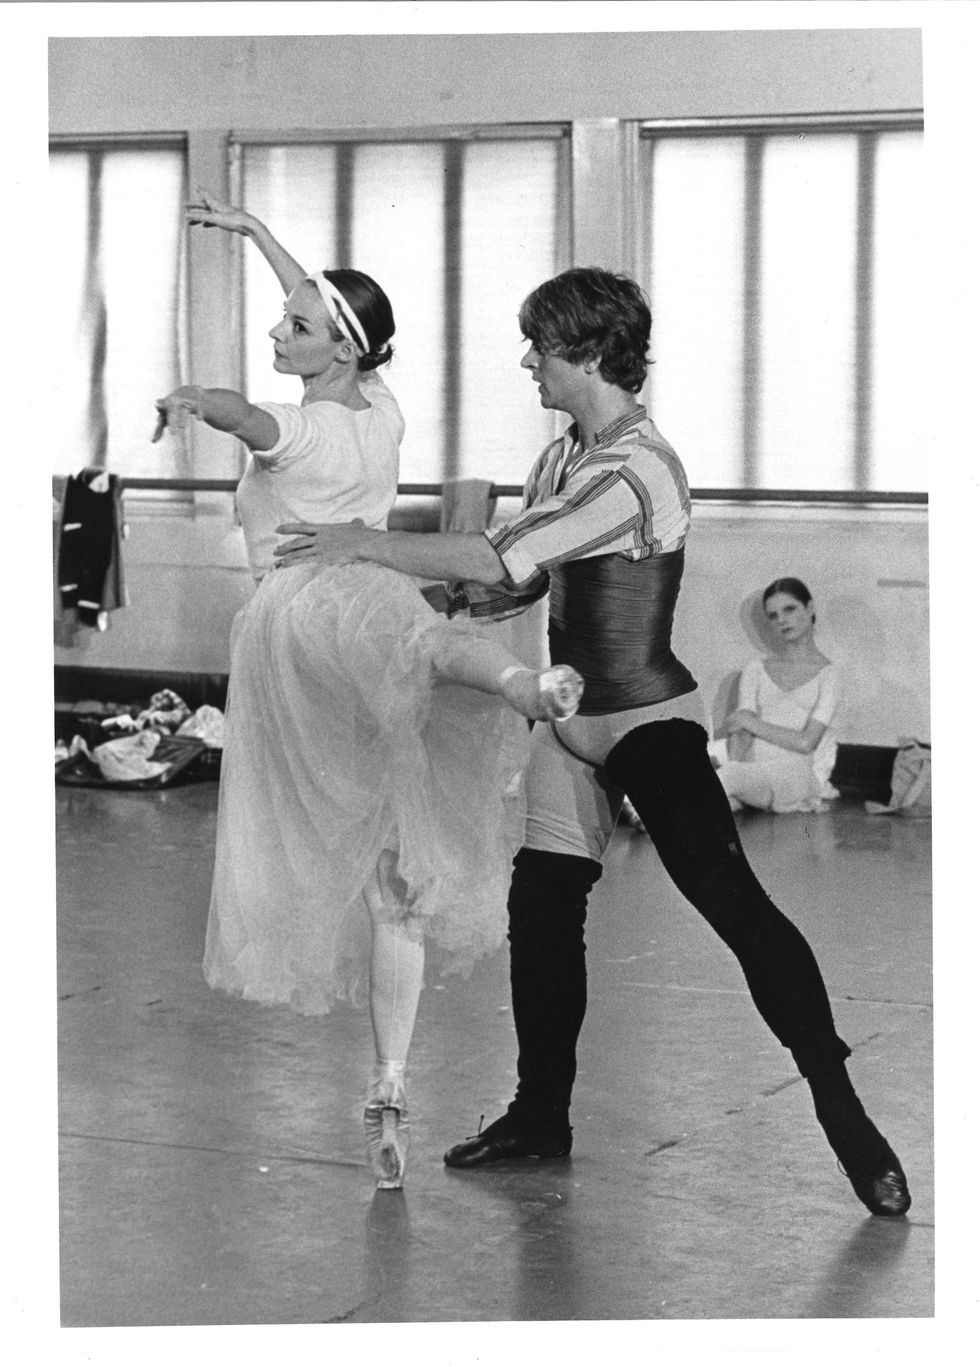 In a studio, Antoinette Sibley, wearing a t-shirt and long skirt over standard ballet practice clothes, piques to arabesque en pointe with her back to the camera, Mikhail Baryshnikov balancing her at the waist.